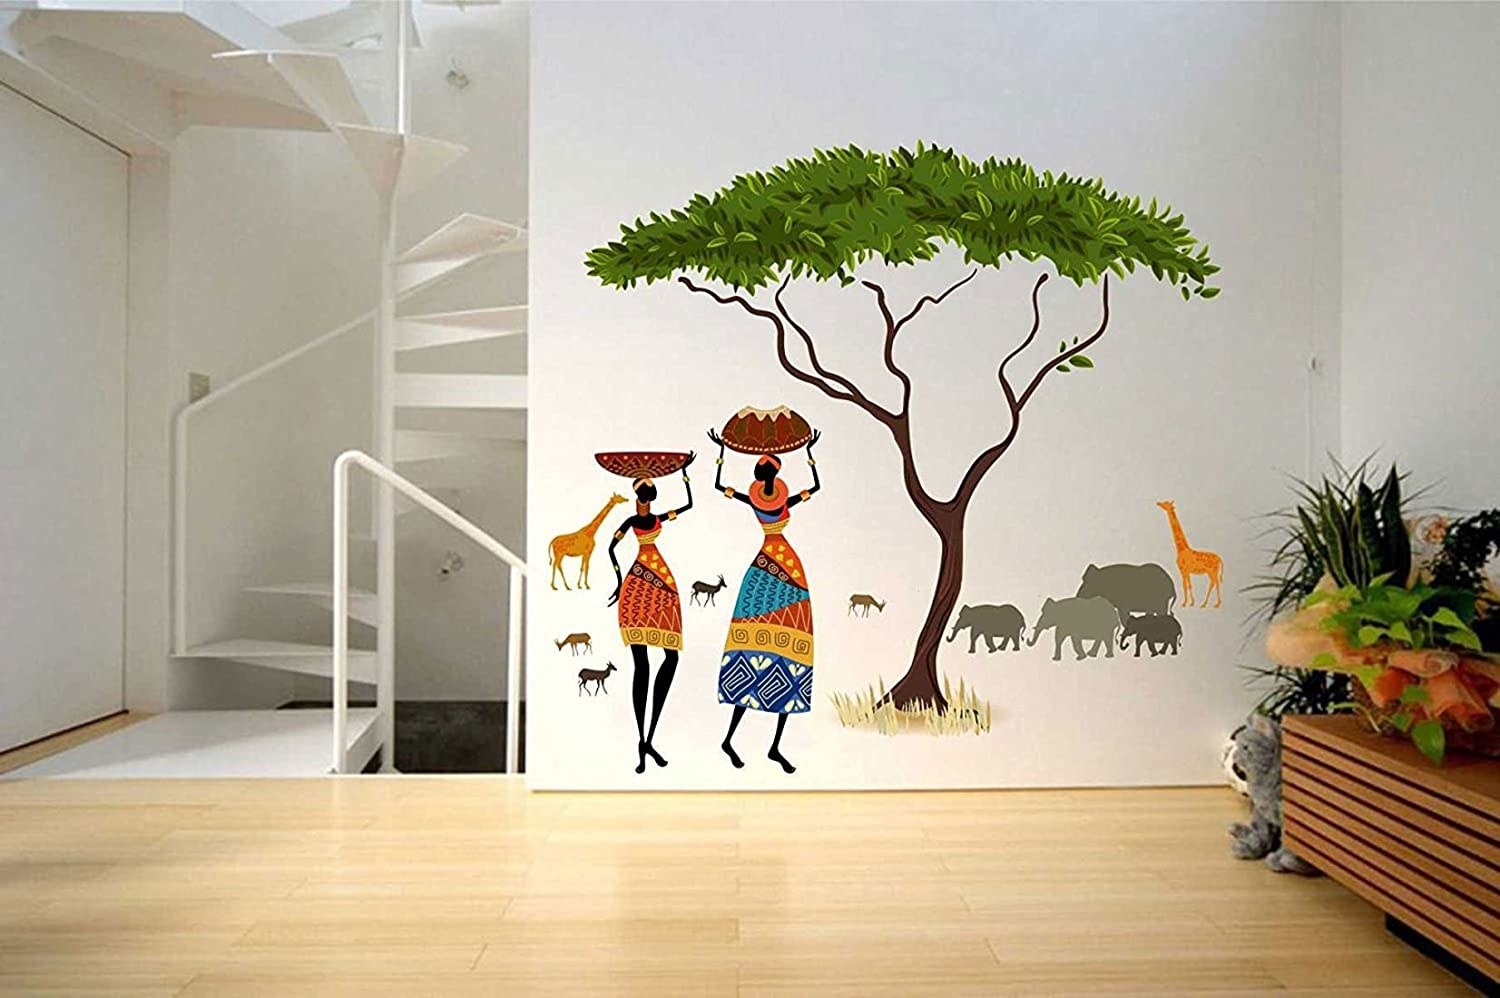 A wall decal with a large tree, giraffes, elephants and two women carrying baskets over their head